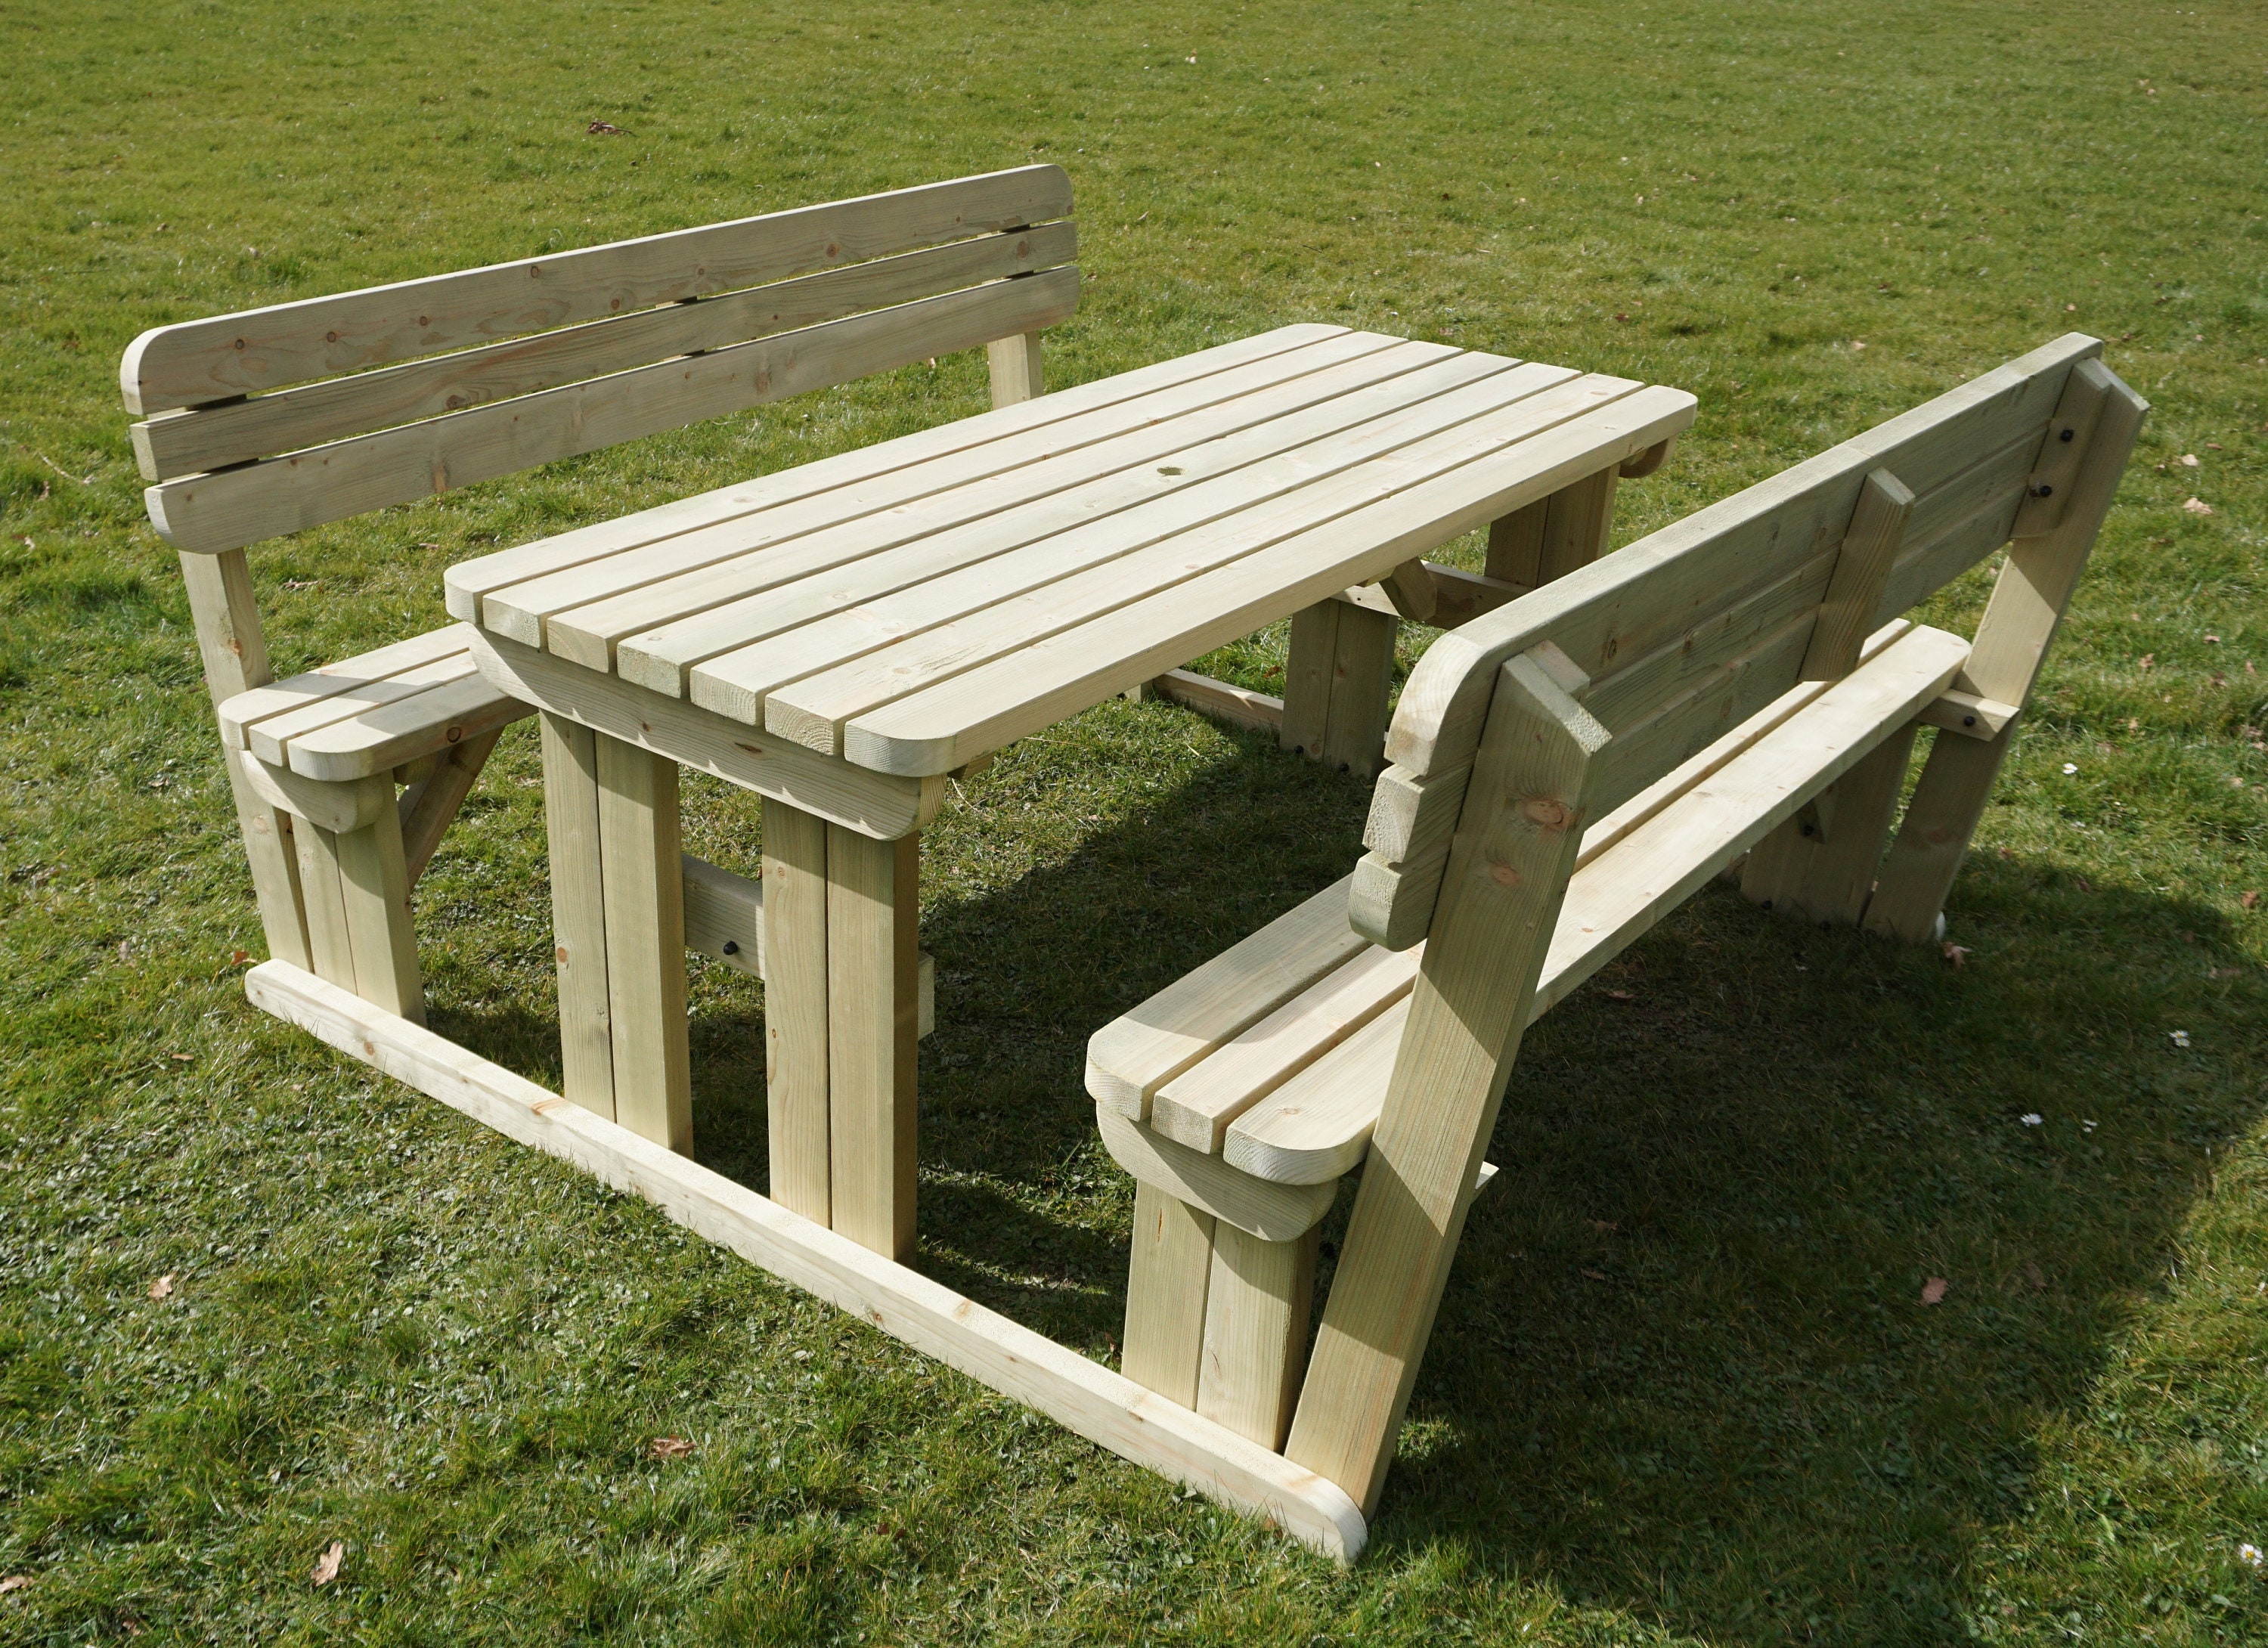 Wooden picnic table and bench set